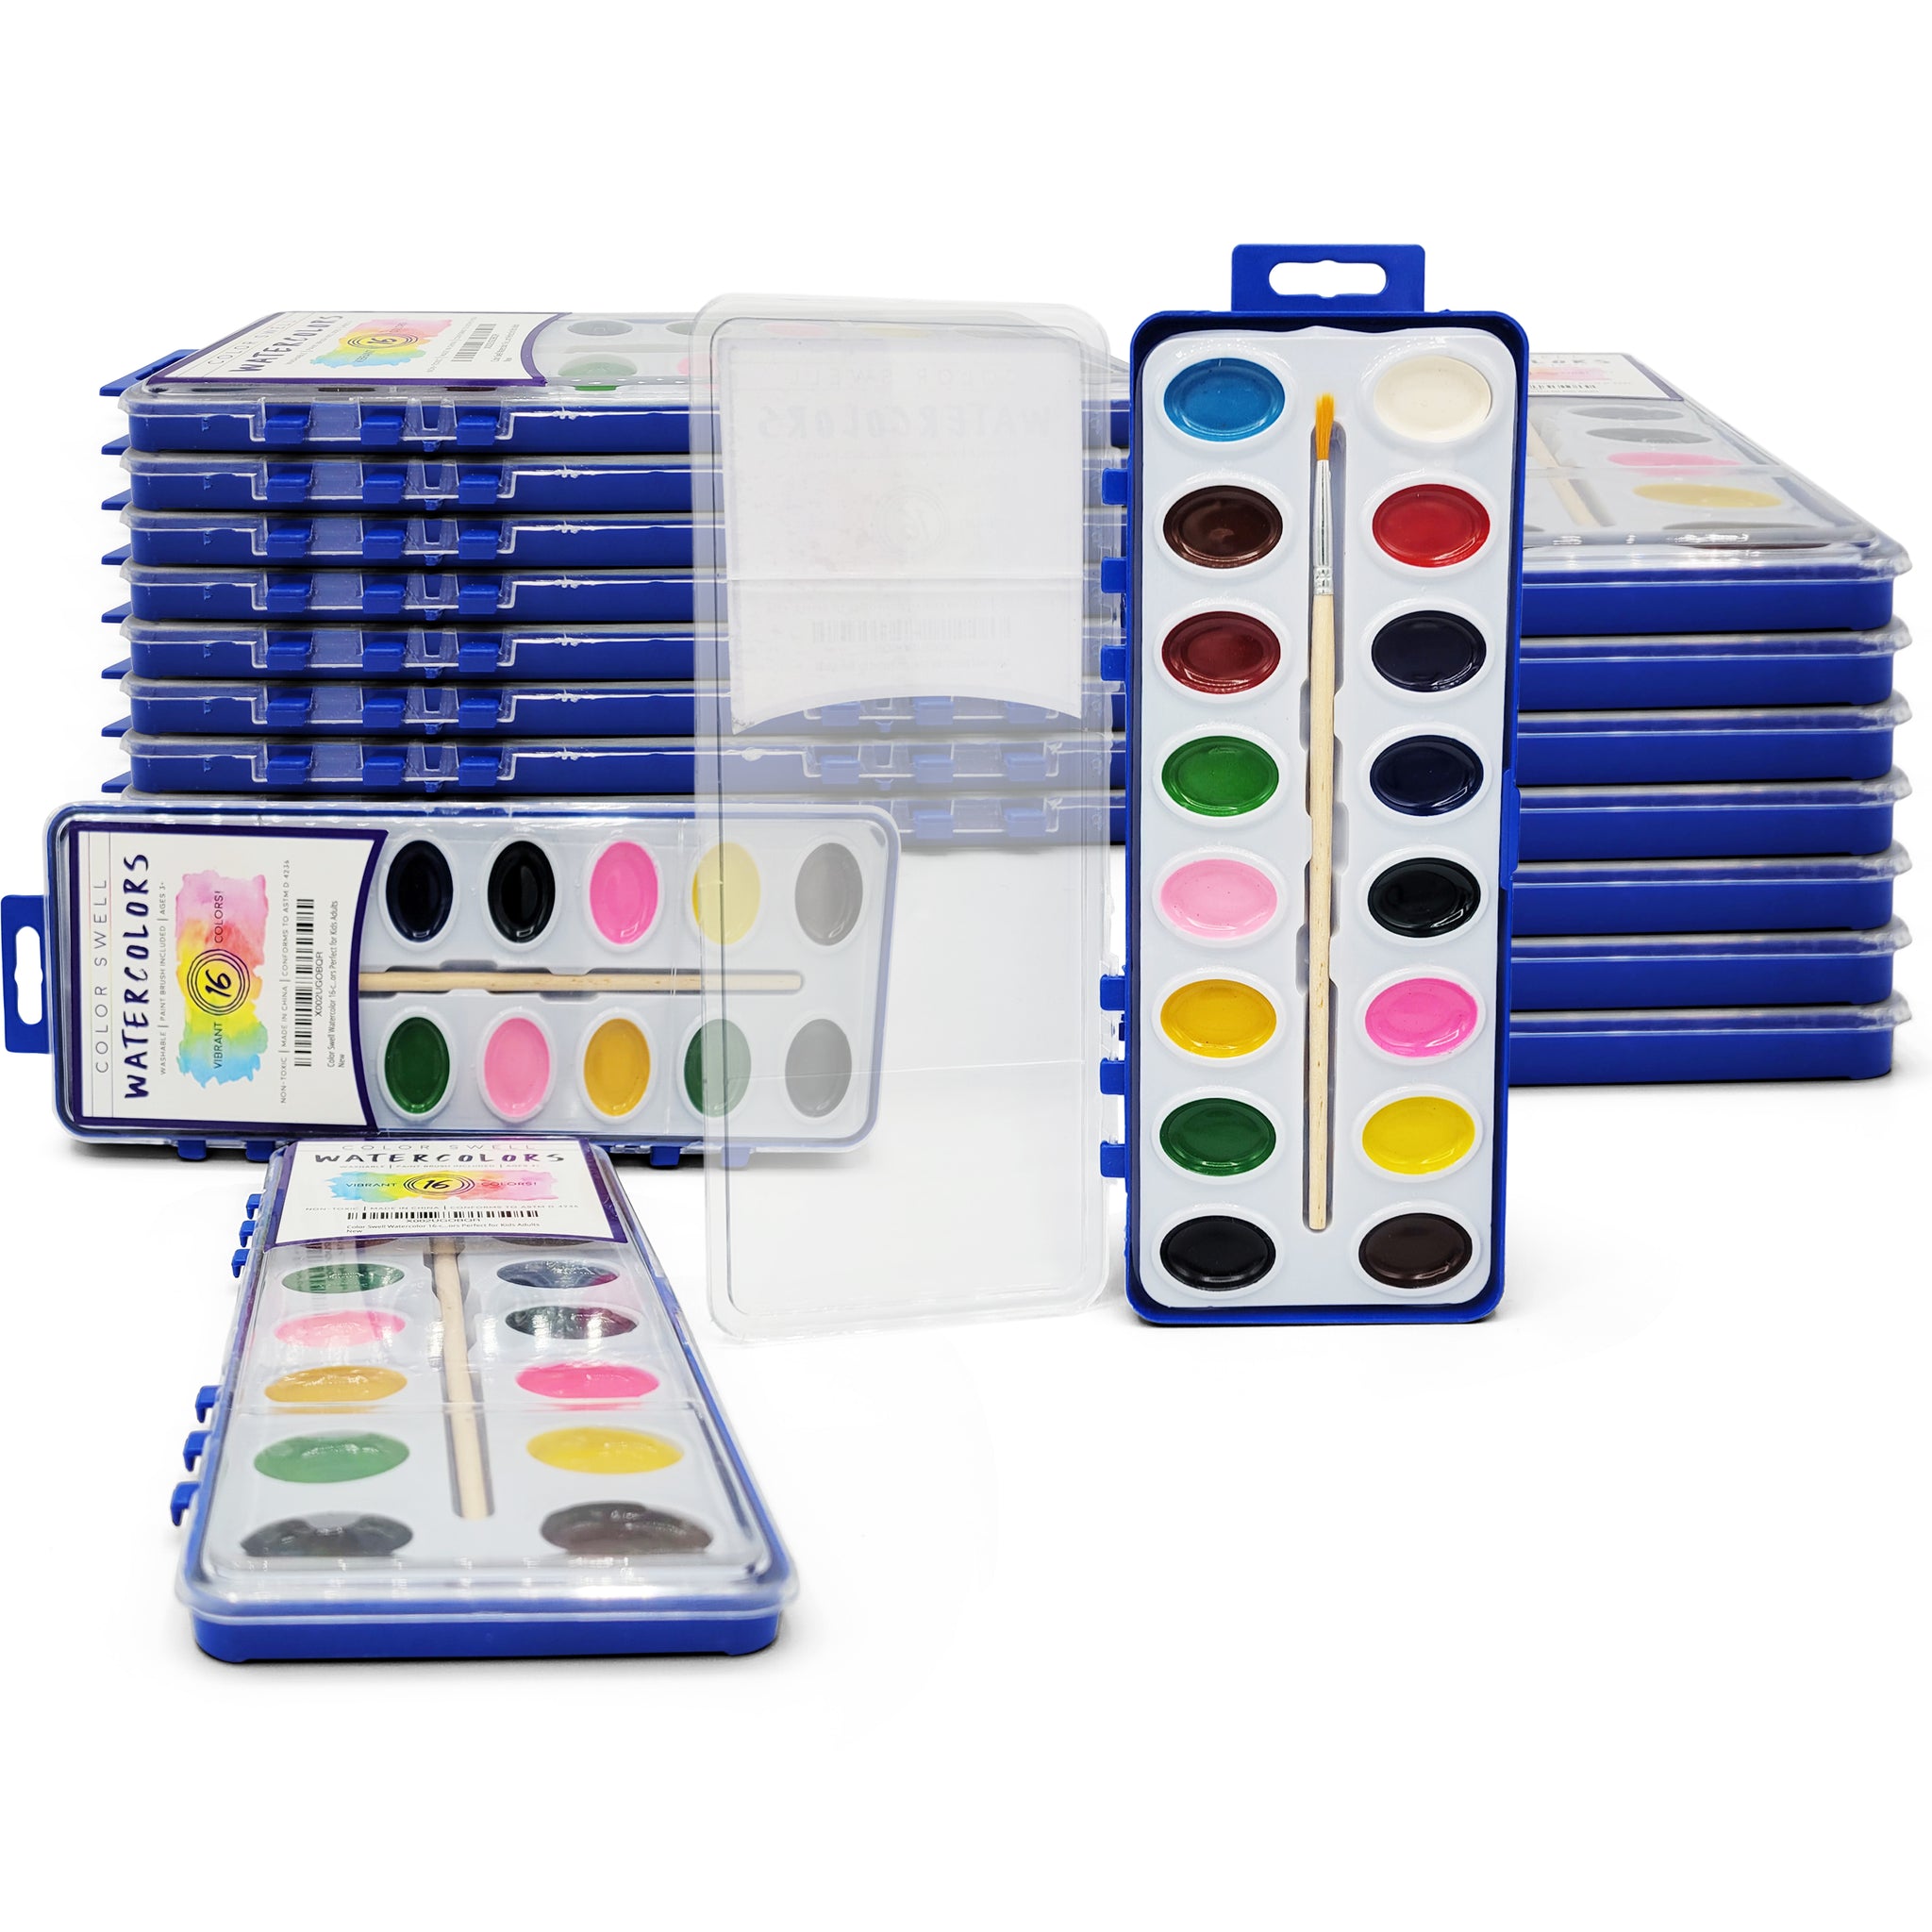 Watercolor Paint Bulk 18 Pack with Wood Brushes 8 Colors Washable Water  Colors G